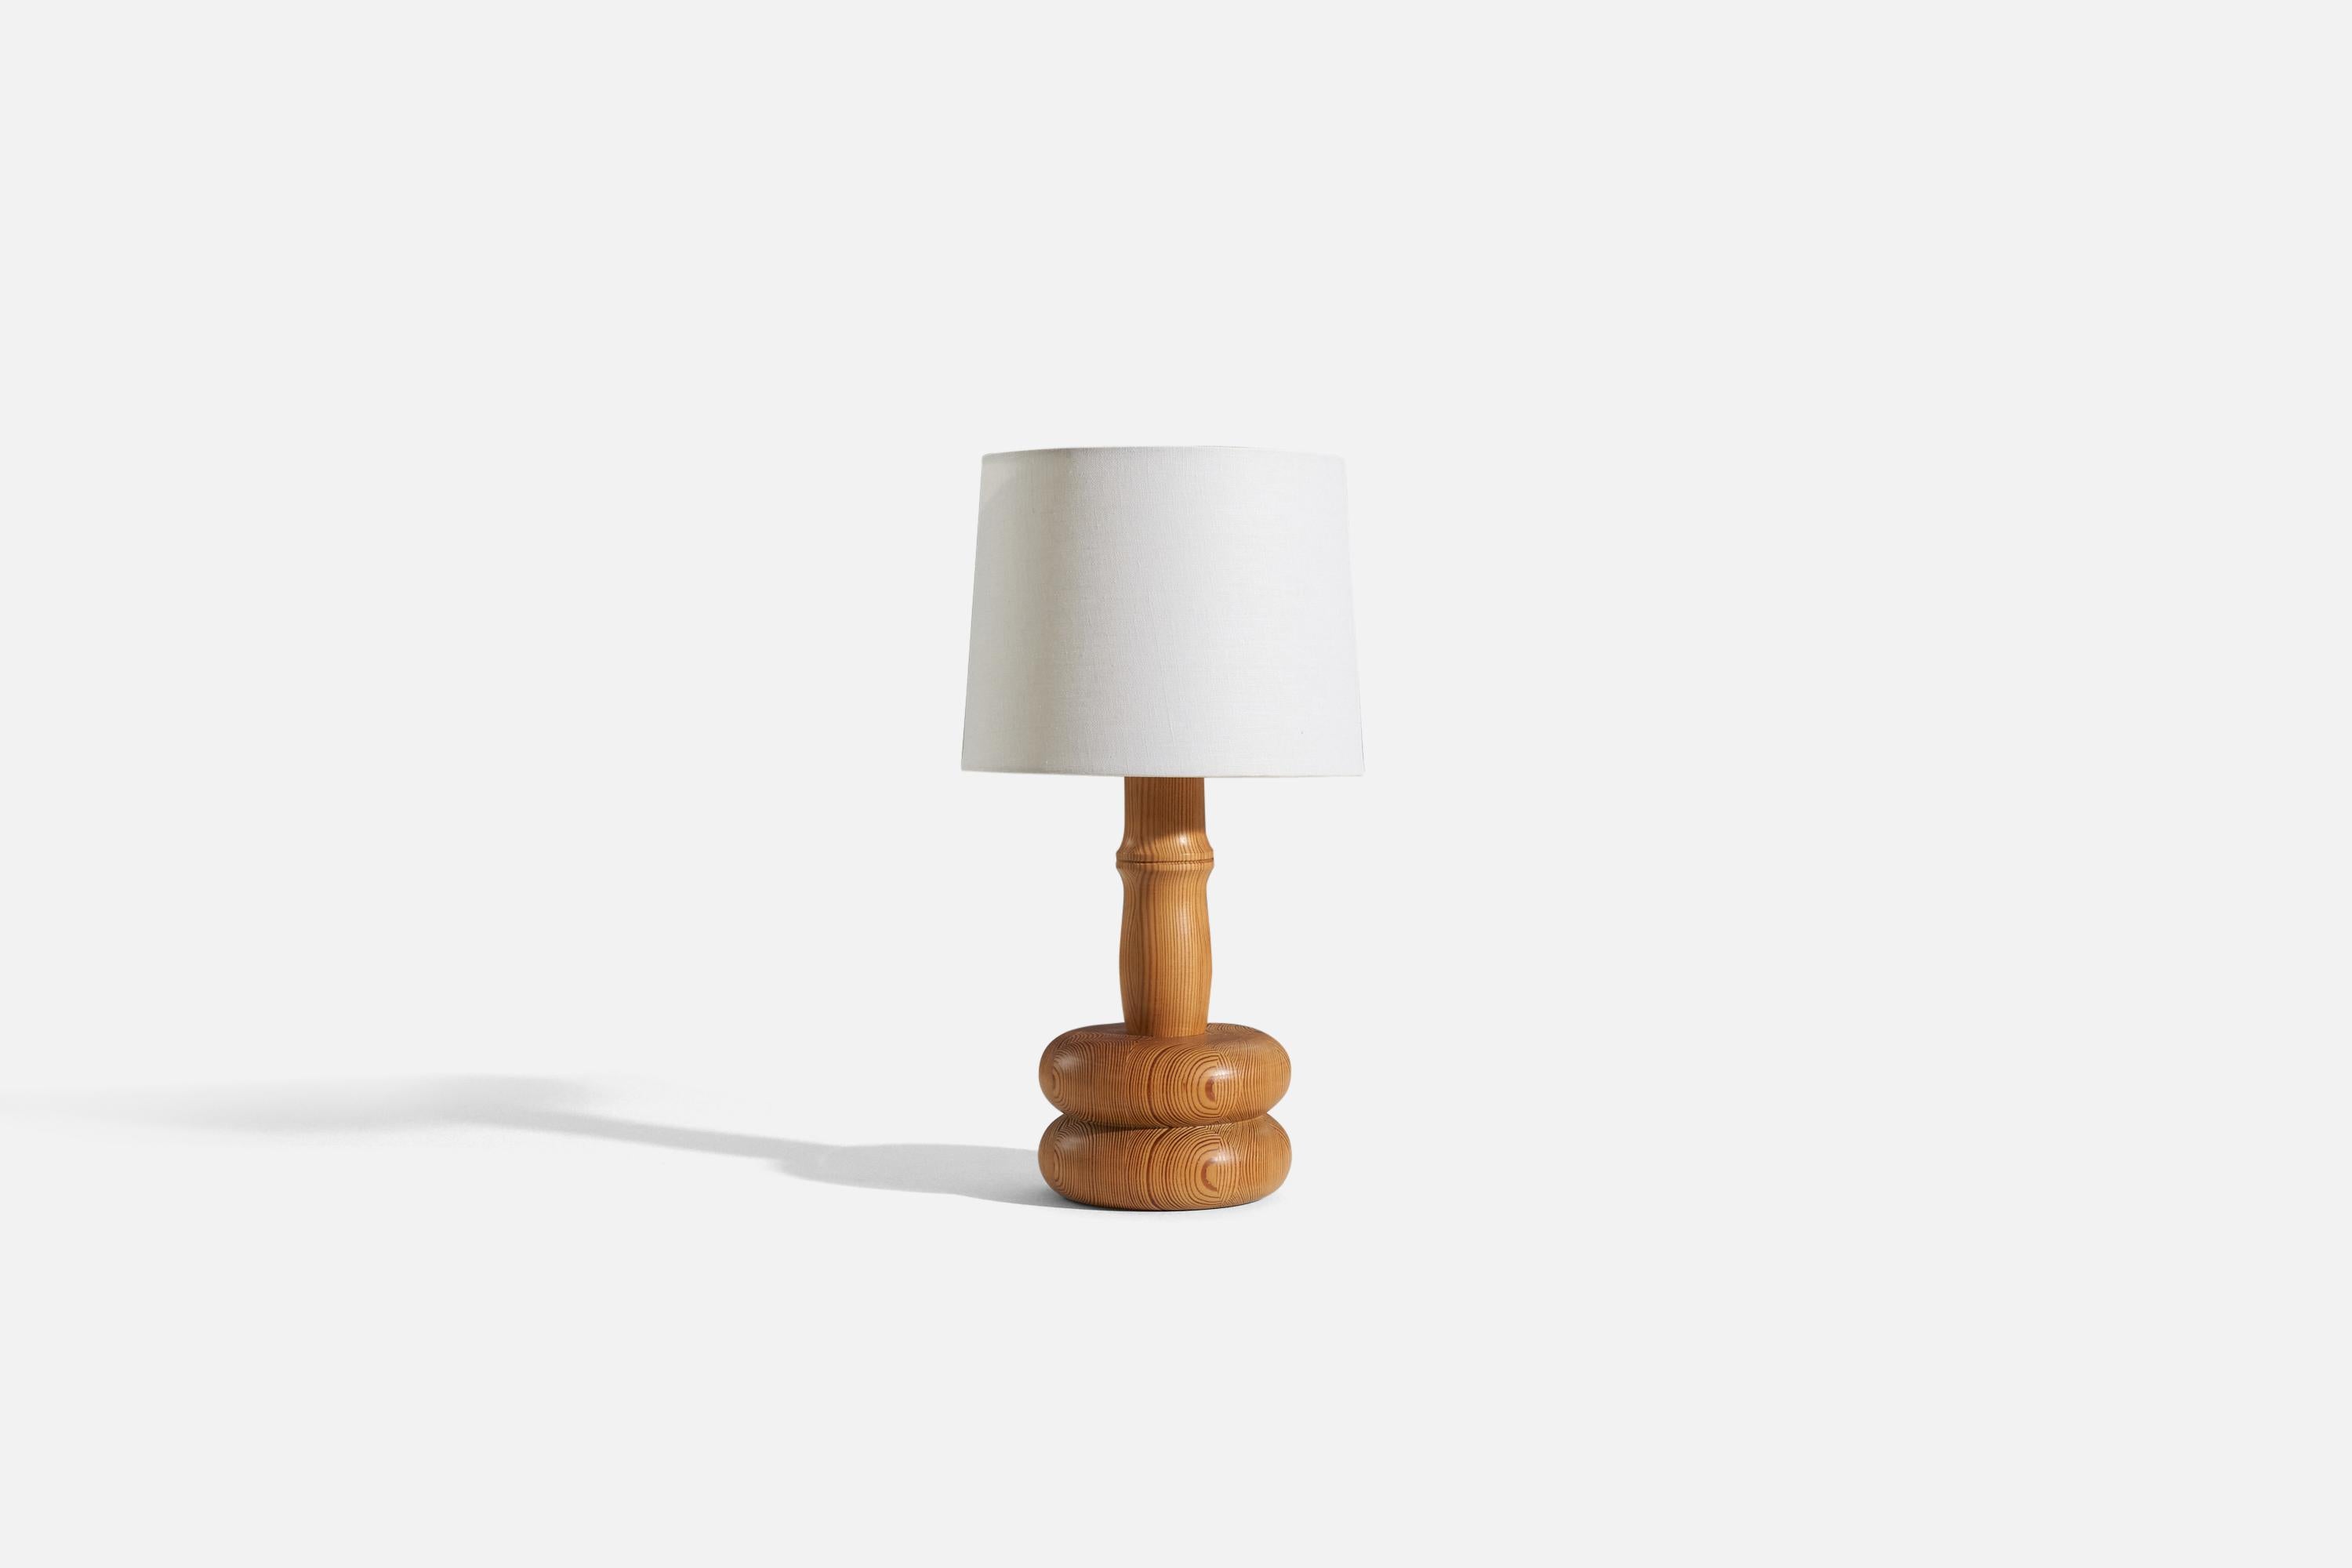 A pine table lamp designed and produced by a Swedish designer, Sweden, 1970s.

Sold without lampshade. 
Dimensions of Lamp (inches) : 15.375 x 6.25 x 6.25 (H x W x D)
Dimensions of Shade (inches) : 9.125 x 10 x 7.875 (T x B x H)
Dimension of